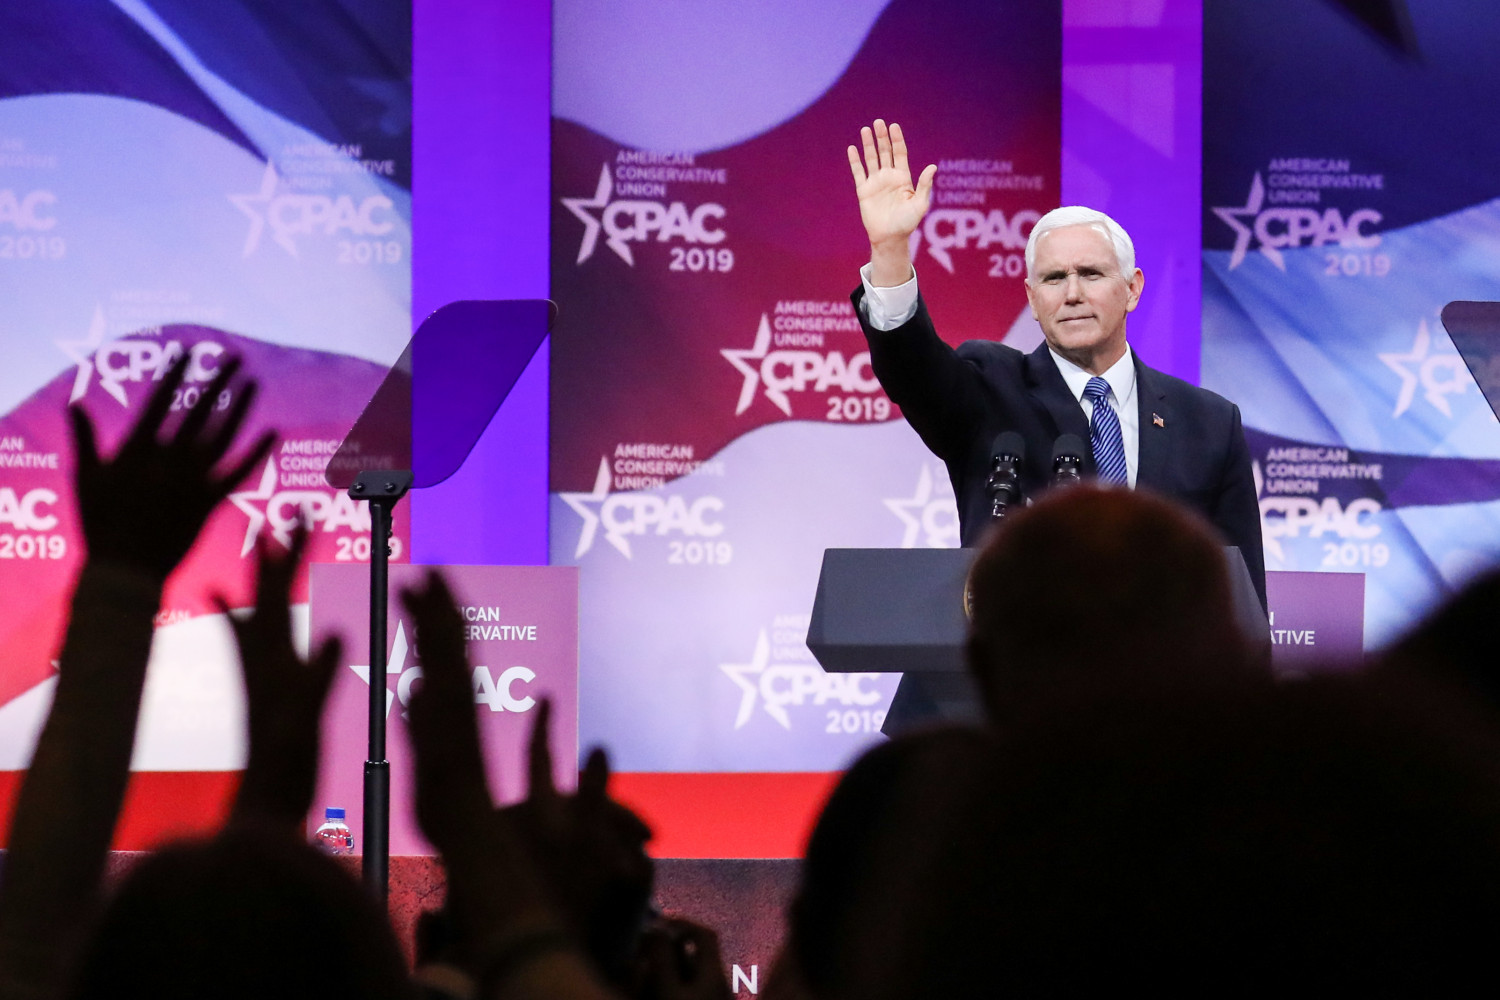 CPAC Director Says It’s a ‘Mistake’ for Mike Pence Not to Attend Conference